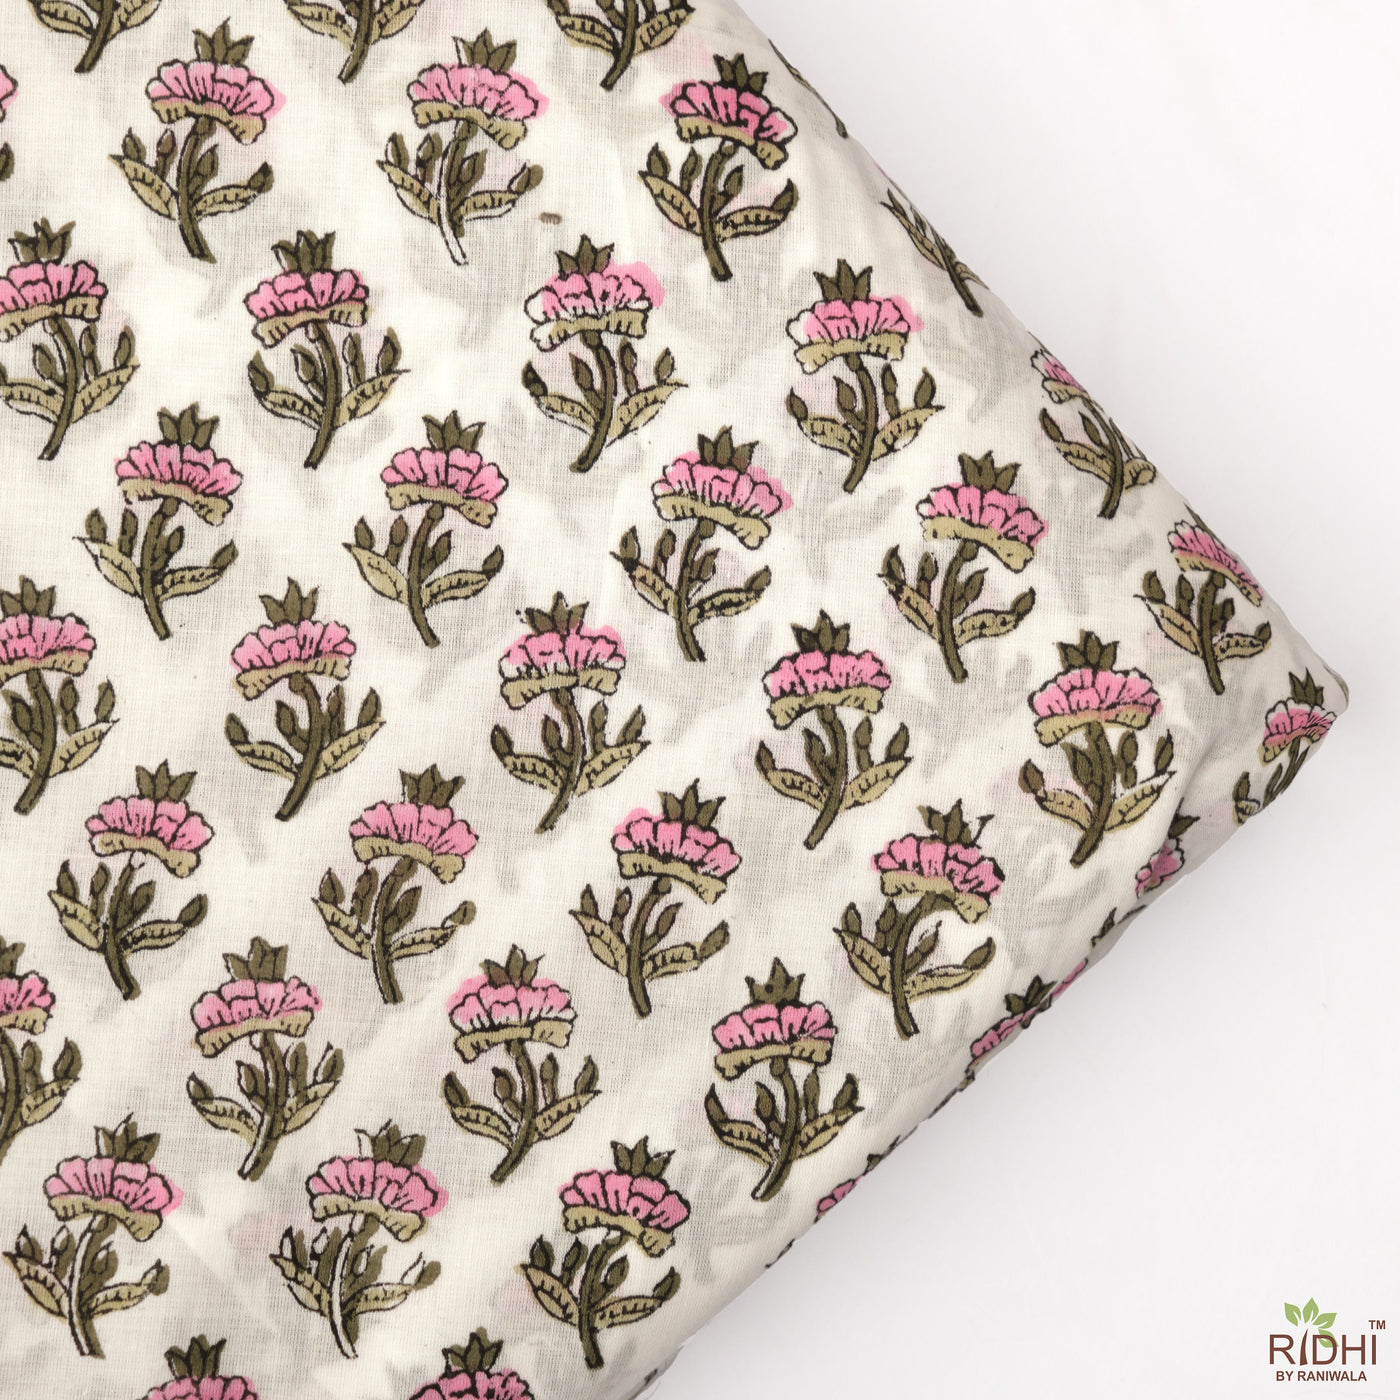 Taffy Pink, Asparagus and Army Green Indian Hand Block Printed 100% Pure Cotton Cloth, Fabric by the yard, Fabric for Women's Clothing Bags